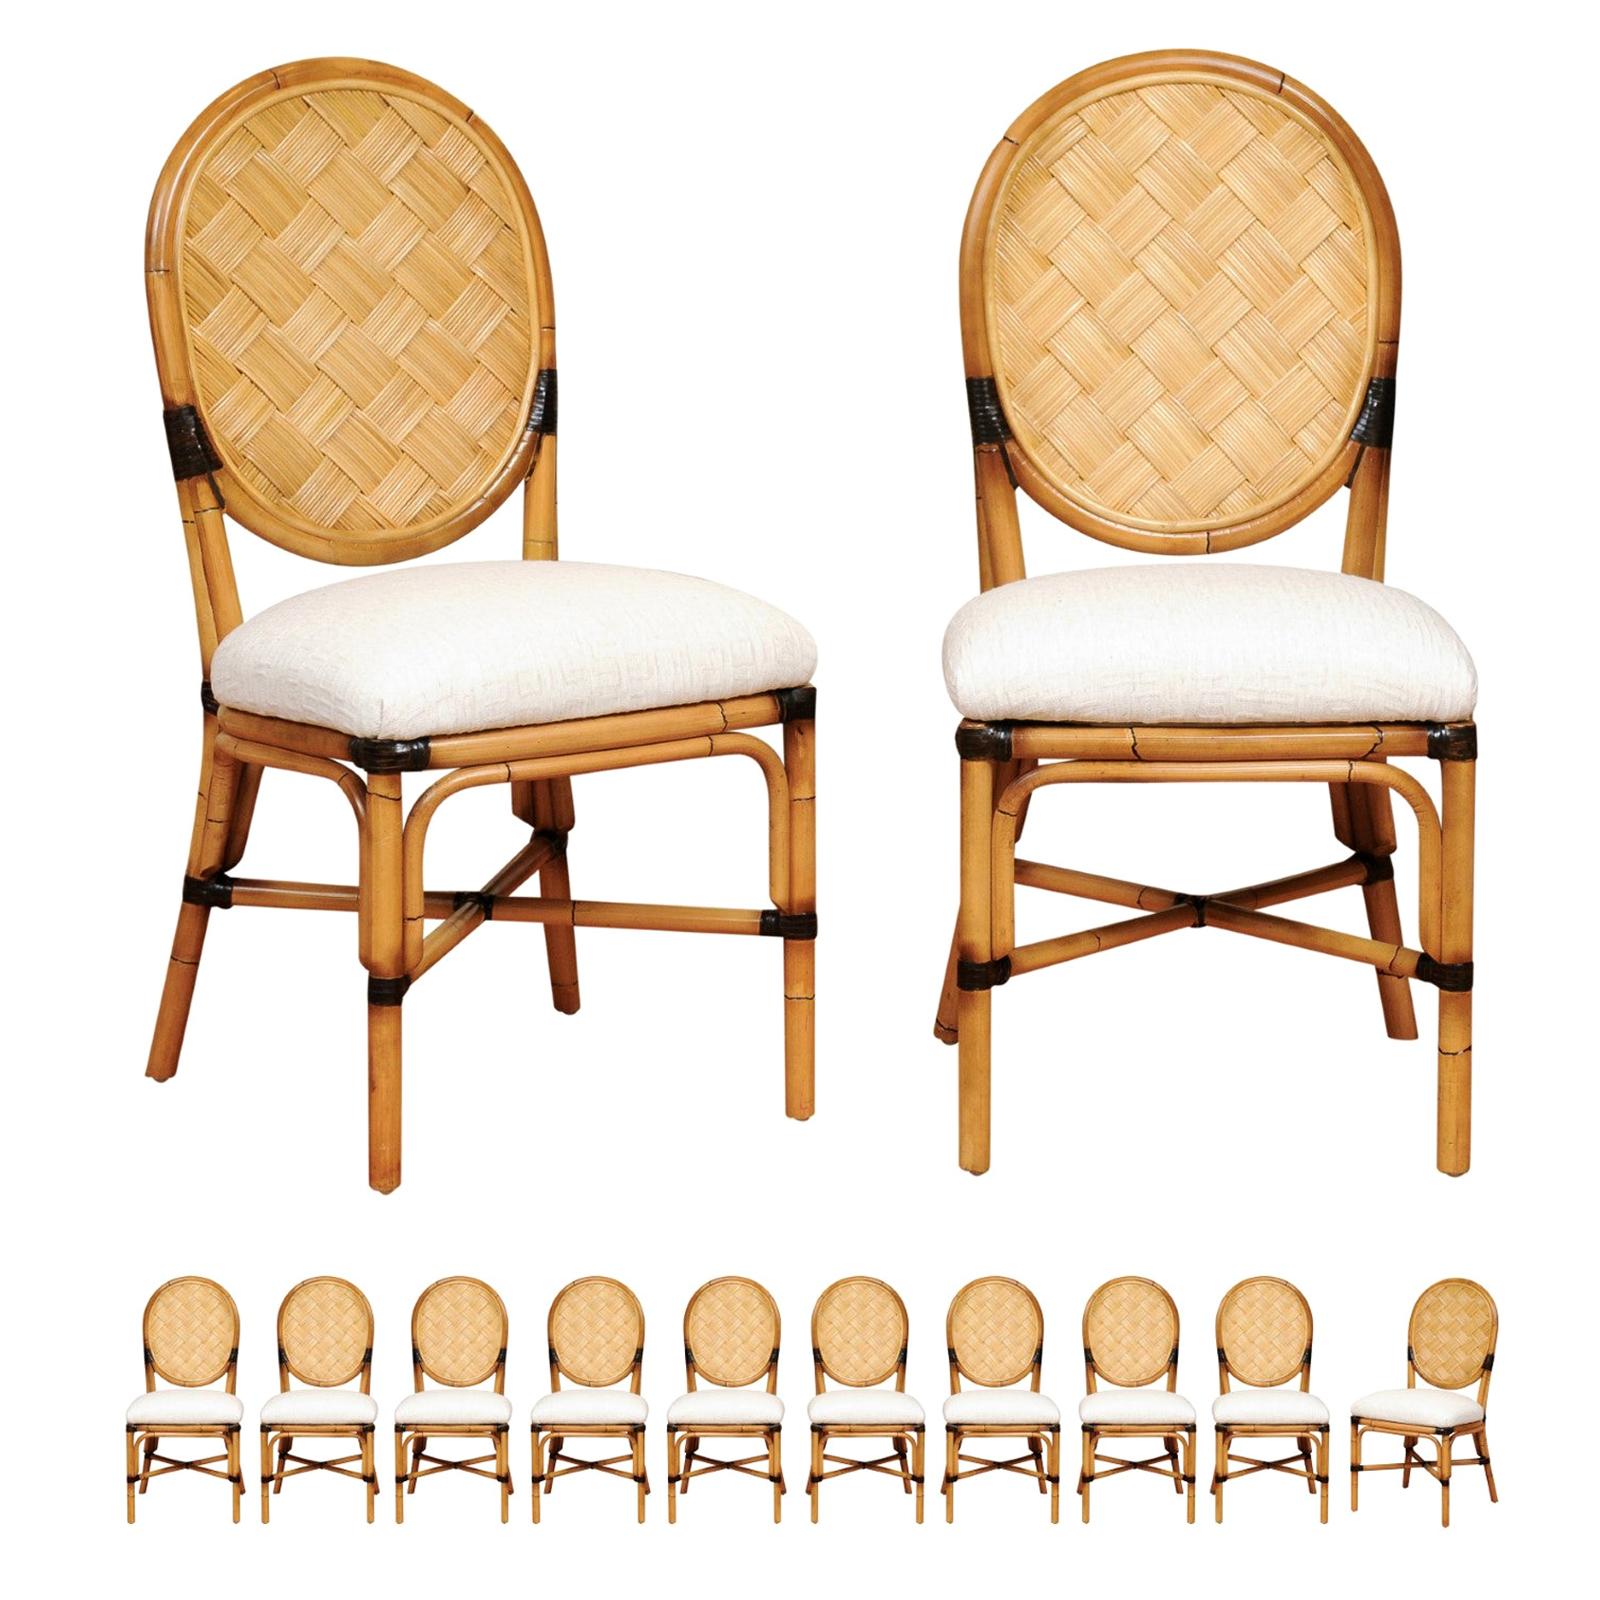 Incredible Set of 12 Custom Dining Chairs in the Style of John Hutton